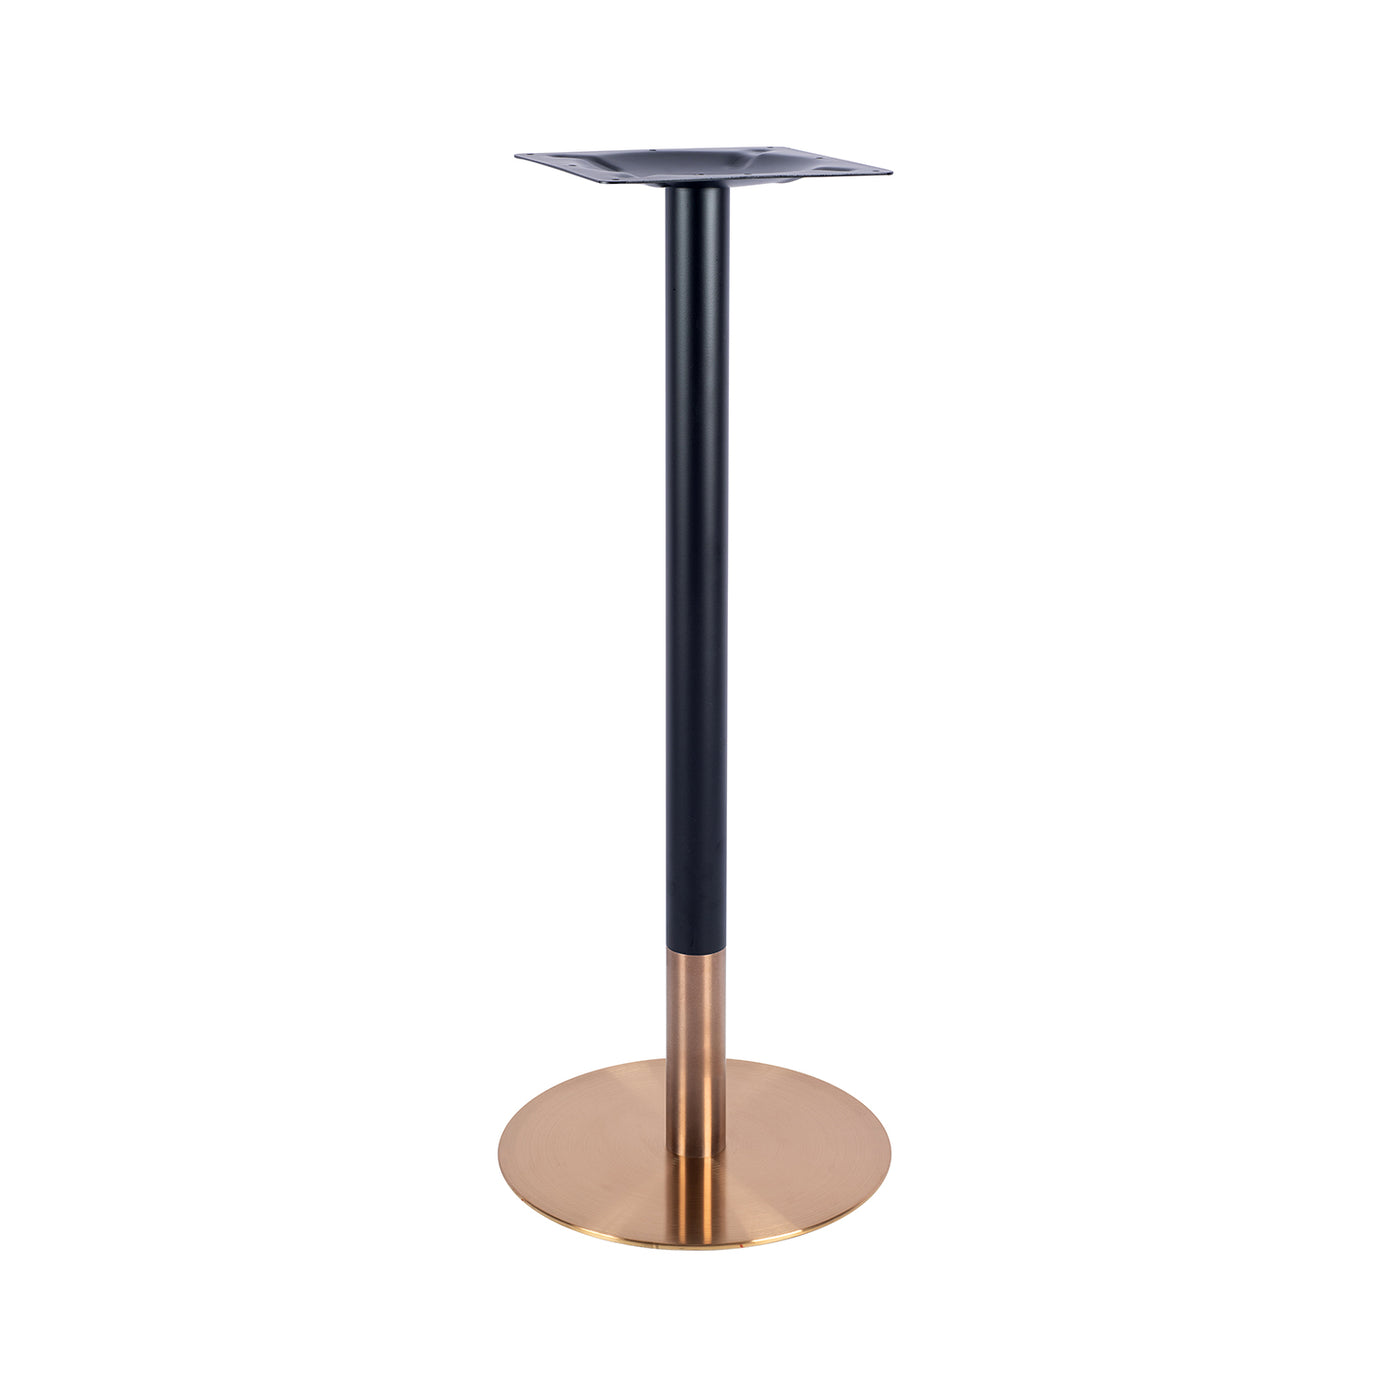 Ava Small Round Table Base - Rose-Gold/Black